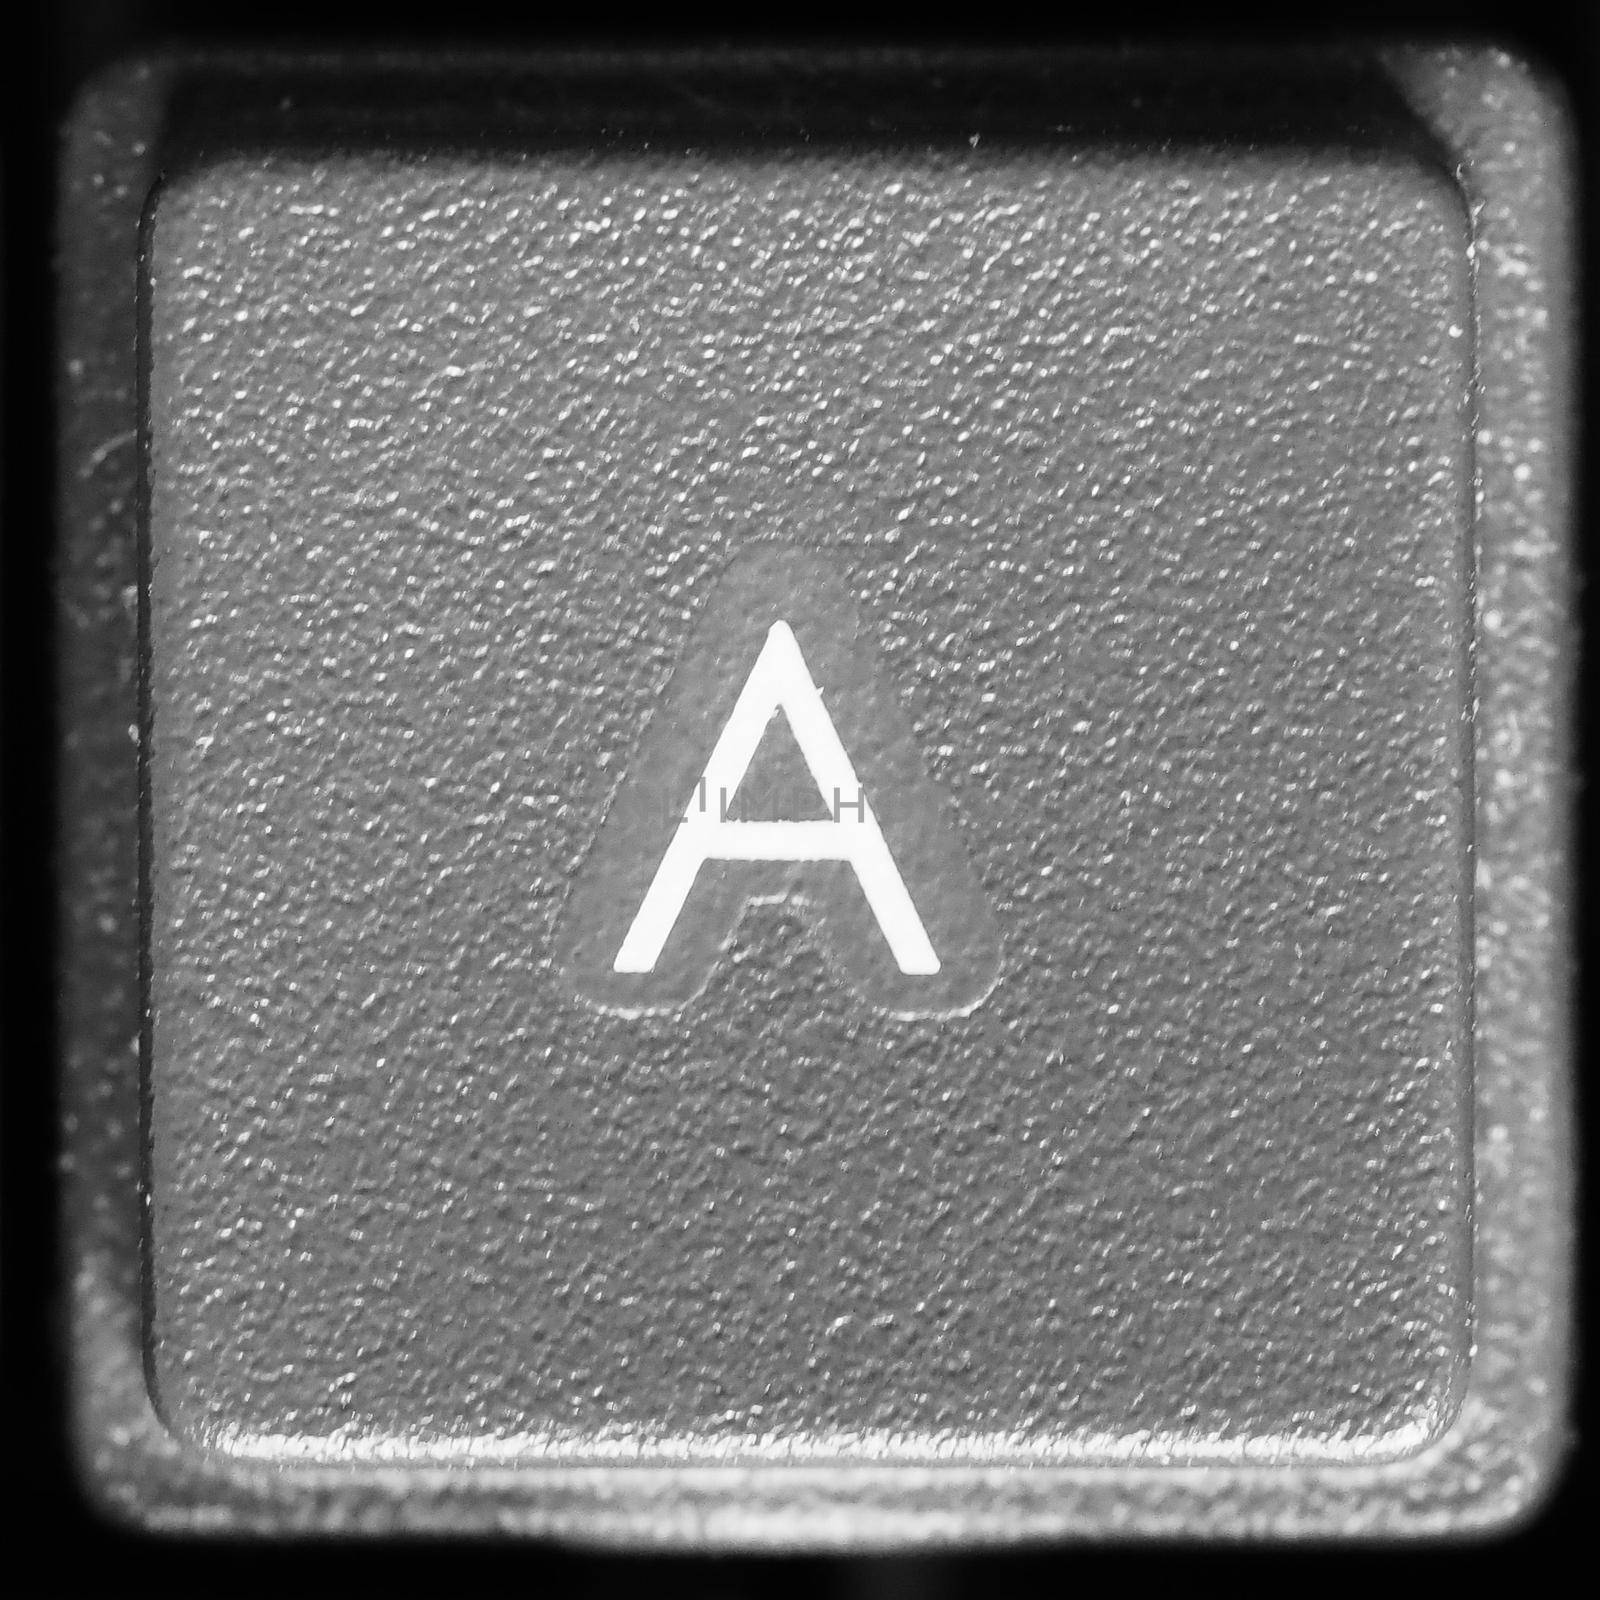 Letter A on computer keyboard by claudiodivizia